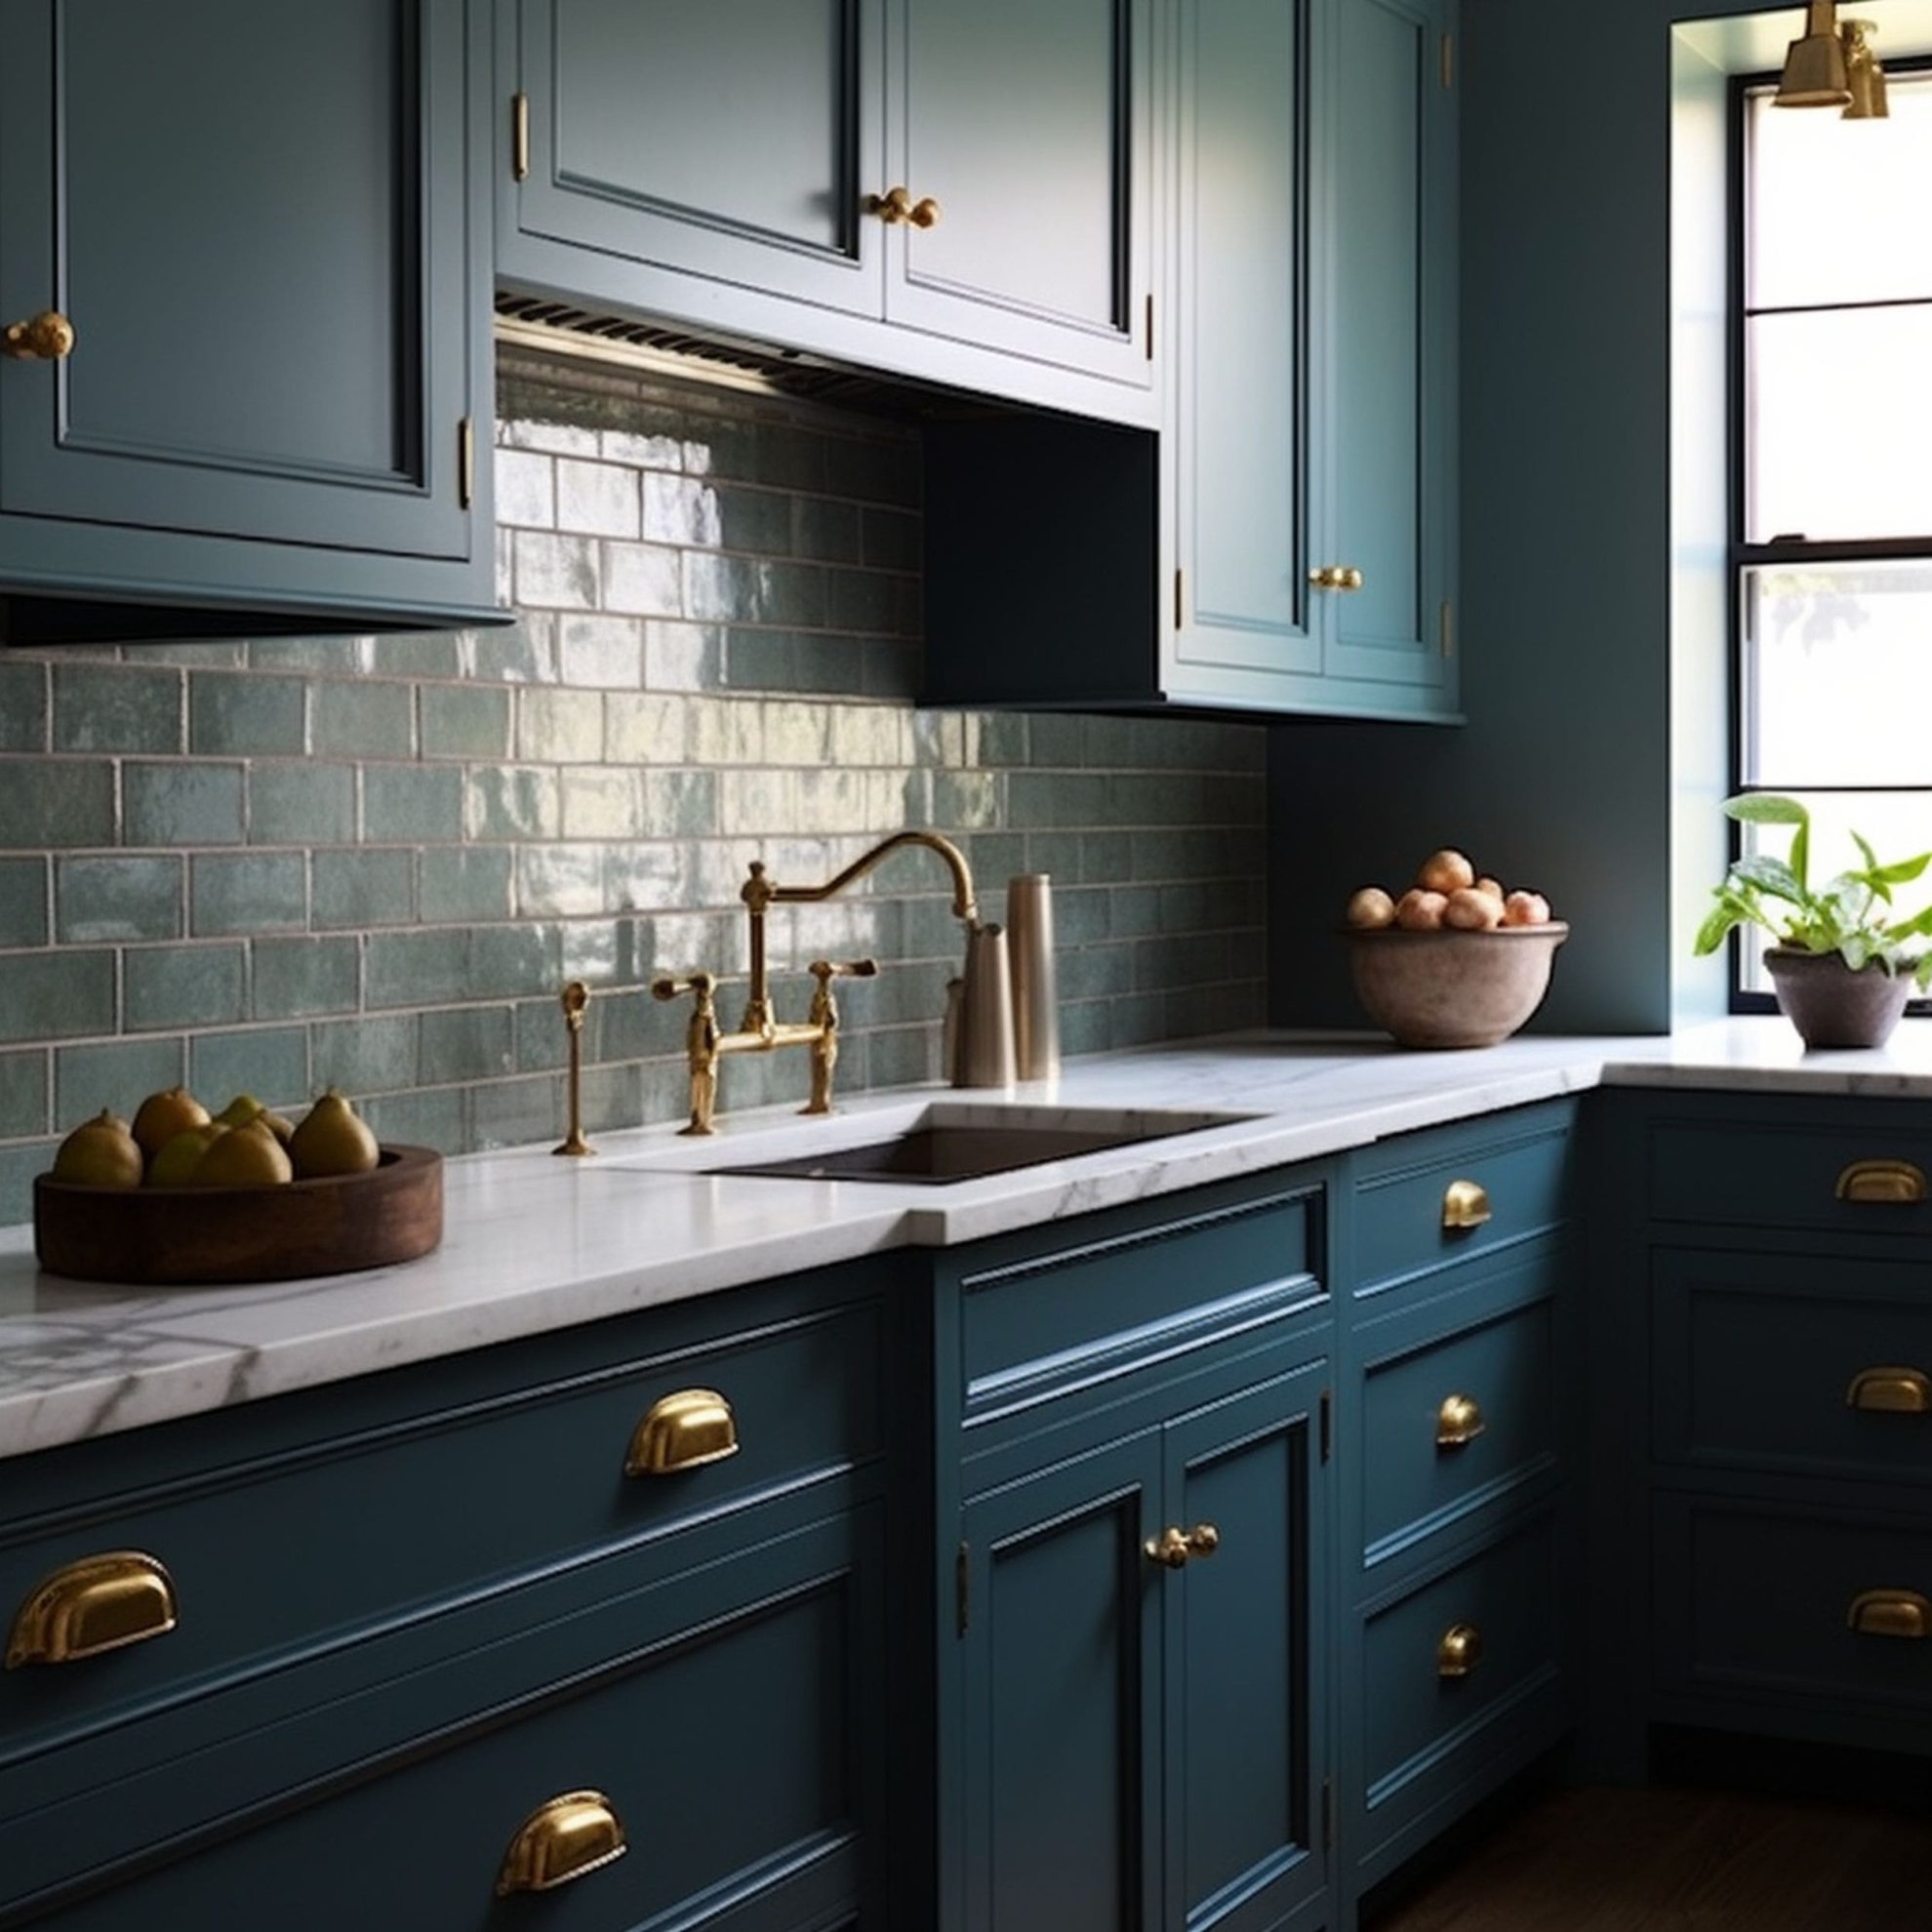 11 Colors That Go Well With Brass - Rhythm of the Home